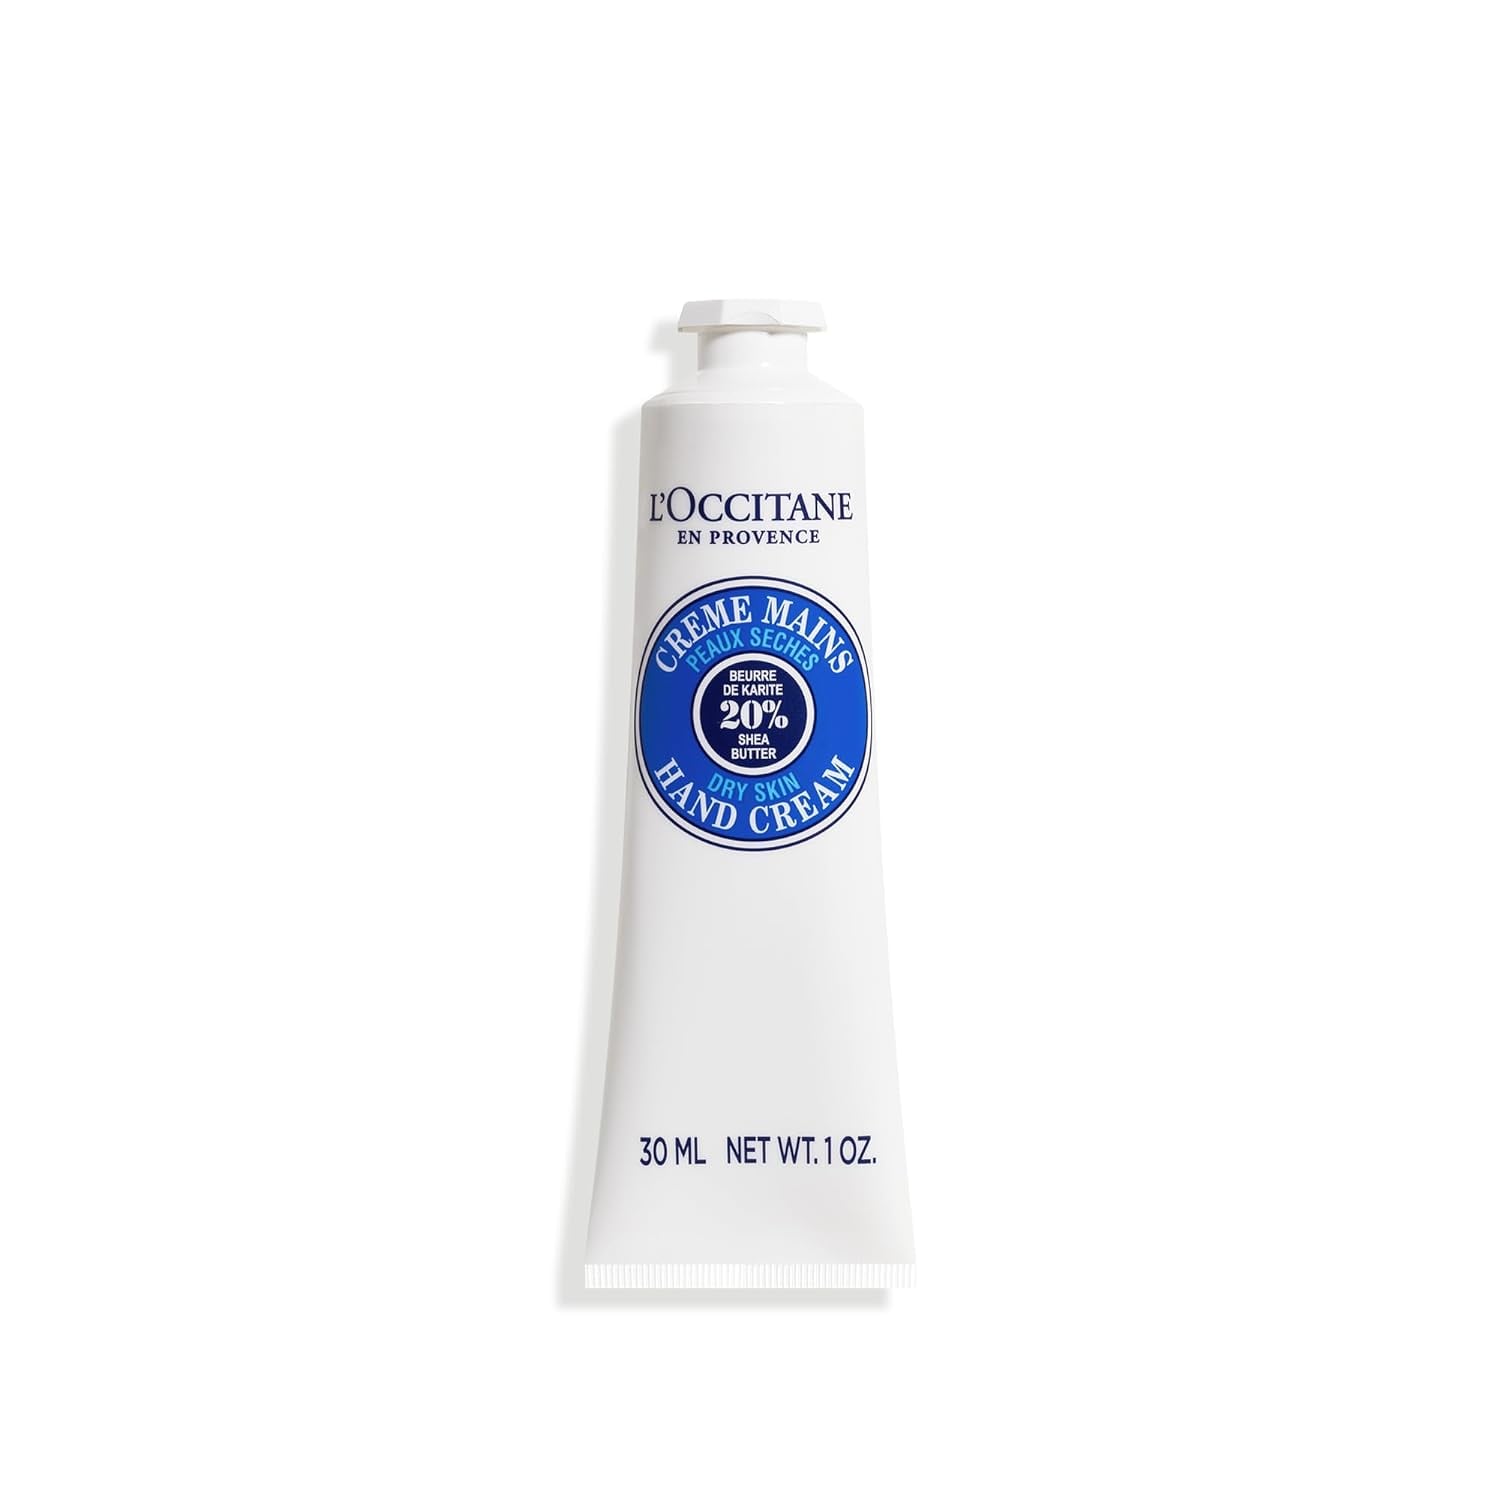 <p><a href="https://www.amazon.com/LOccitane-Fast-Absorbing-Shea-Butter-Cream/dp/B006UEOQ5K/">BUY NOW</a></p><p>$30</p><p><a href="https://www.amazon.com/LOccitane-Fast-Absorbing-Shea-Butter-Cream/dp/B006UEOQ5K/" class="ga-track"><strong>L'Occitane Shea Butter Hand Cream</strong></a> ($30) </p><p>If you're regularly spritzing hand sanitizer, you'll want to follow it with a nourishing hand lotion, like this luxurious tube from L'Occitane. It's packed with shea butter to help make your hands feel baby-soft. We guarantee you'll find yourself reaching for it over and over again.</p>